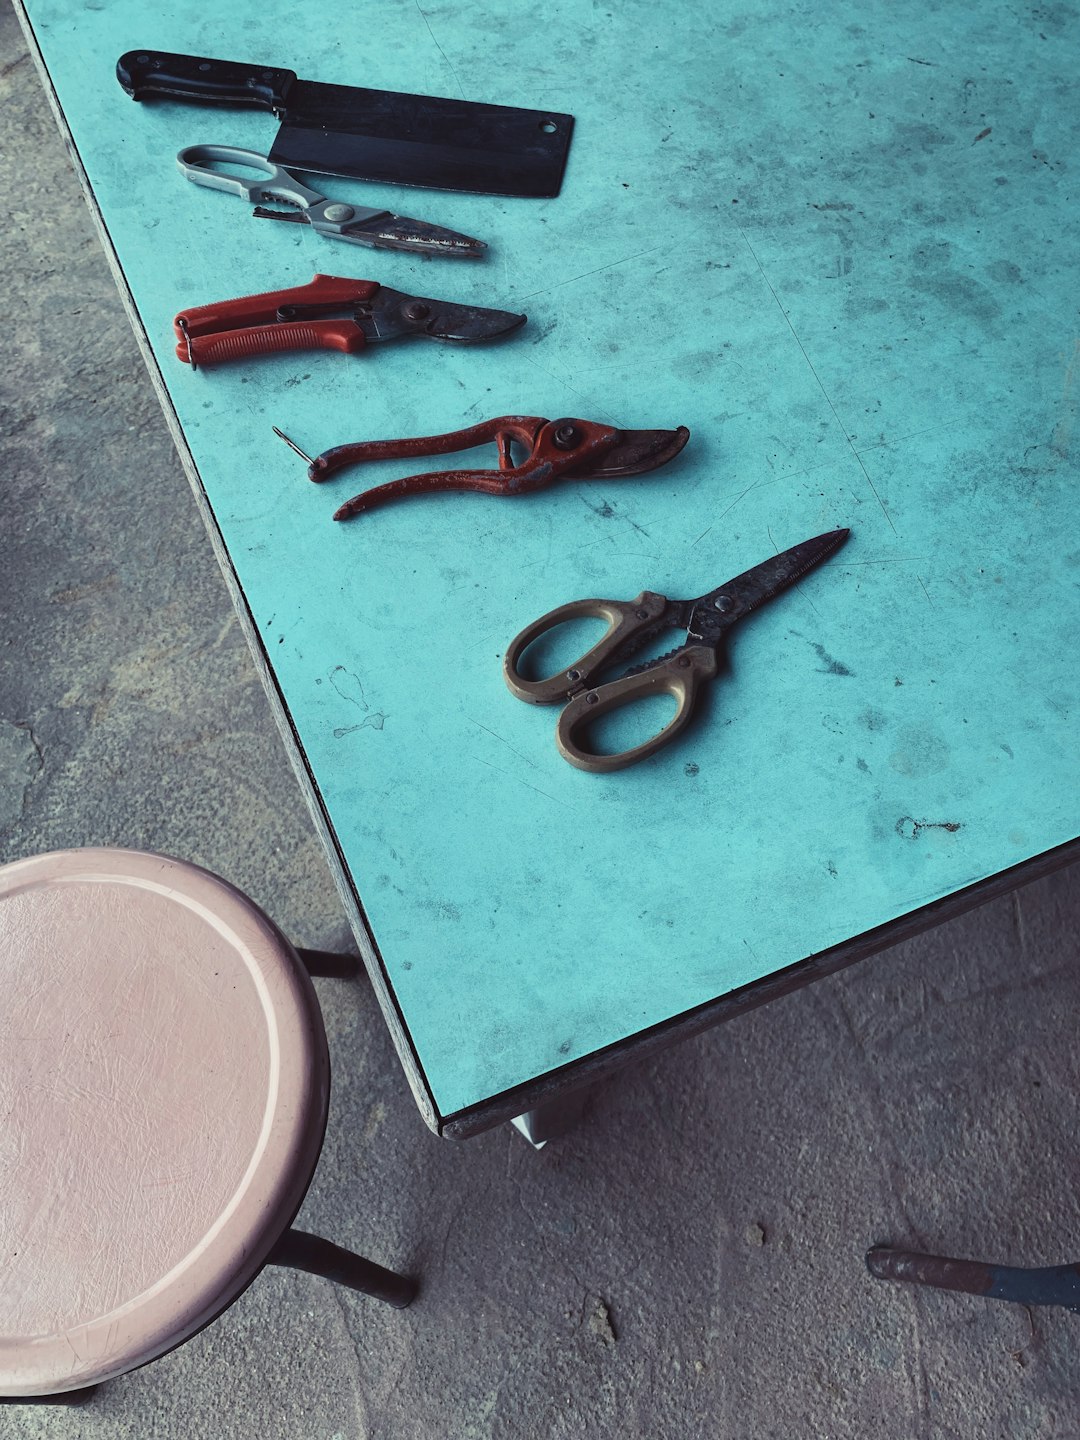 red and black scissors on teal table